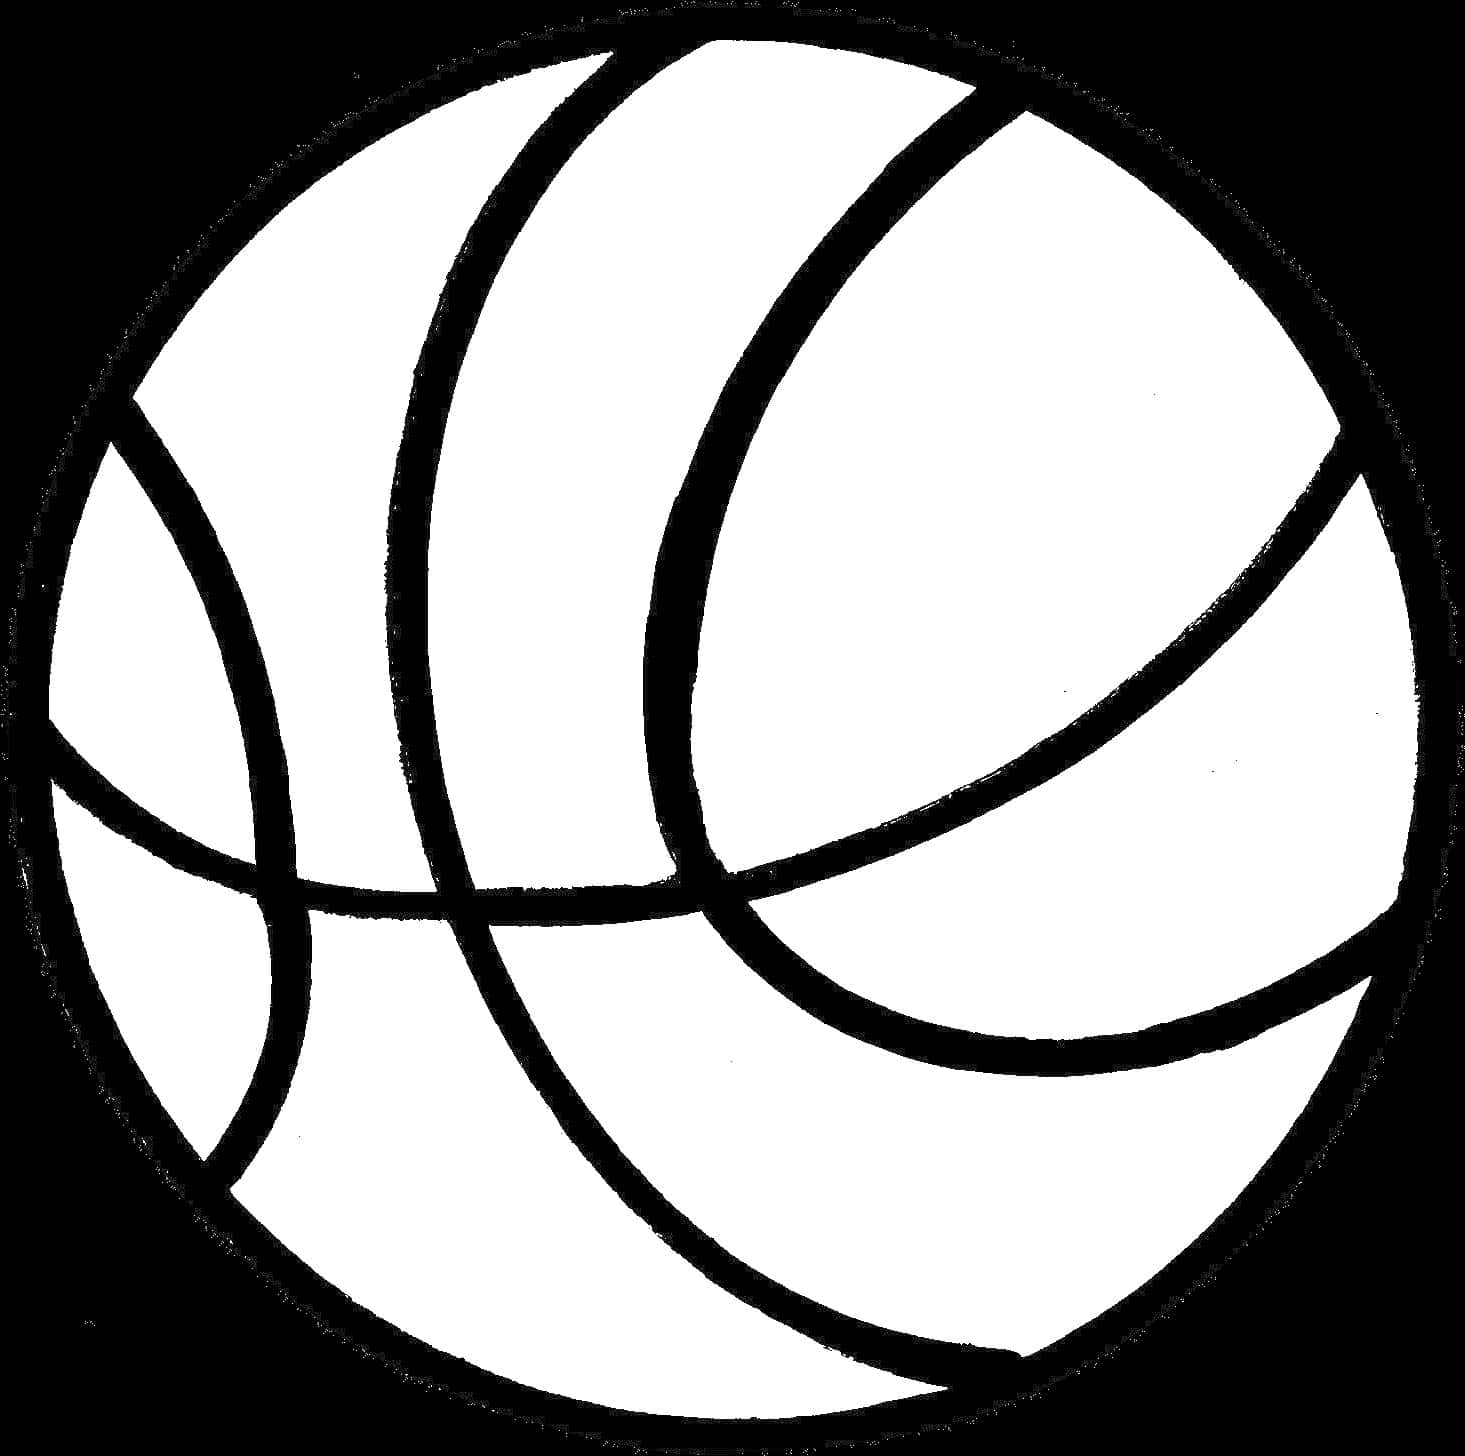 Monochrome Basketball Graphic PNG